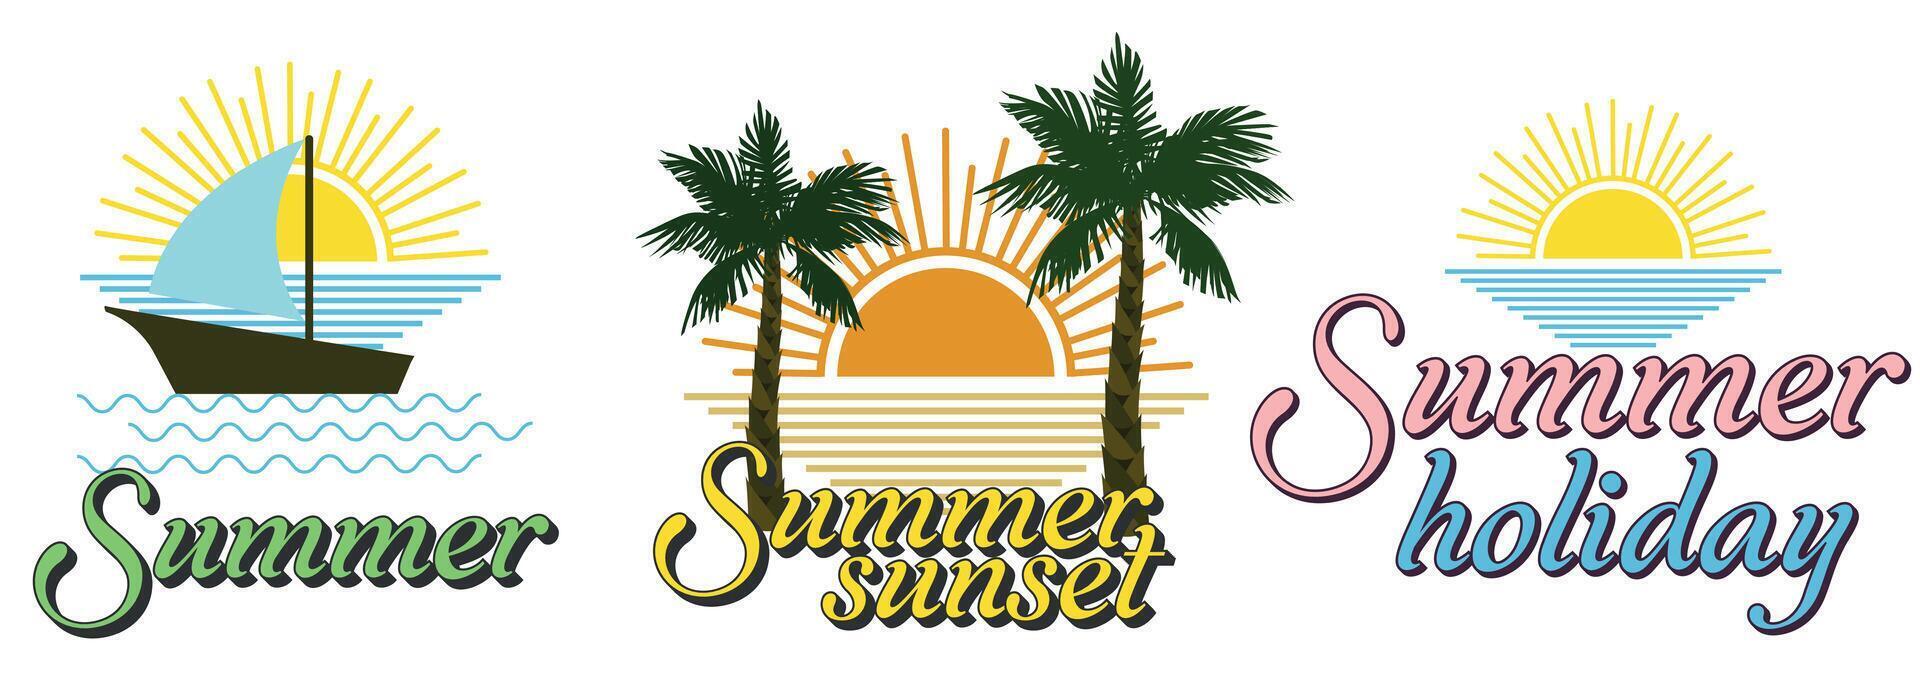 Summer tropical t-shirt design with palm trees and sun. Summer beach college style slogan print. Tee shirt and apparel print design. Modern line t shirt illustration with font print vector